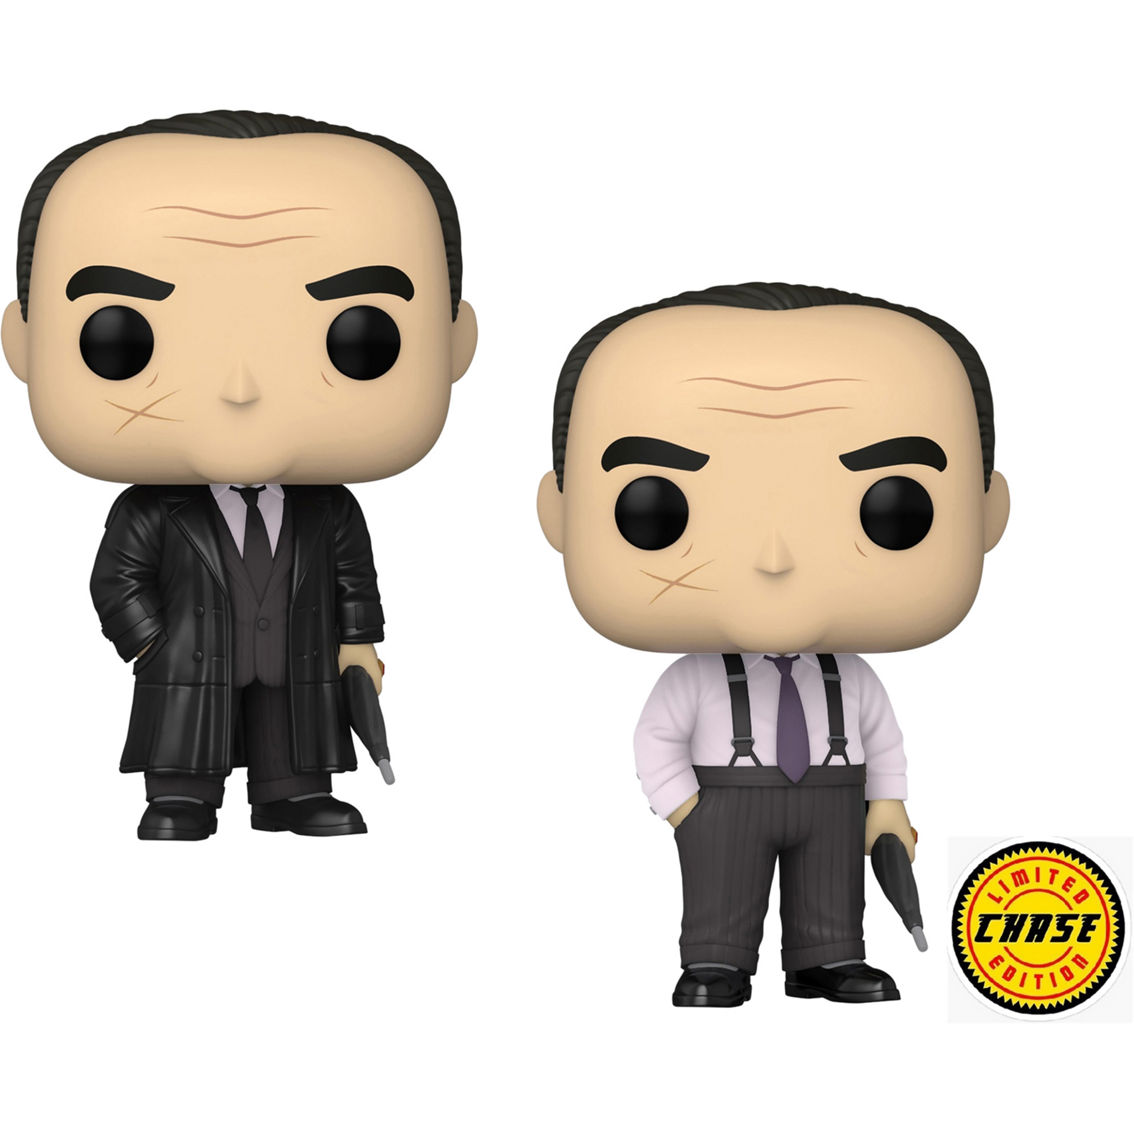 Funko POP Movies The Batman Collector's Set - Image 8 of 8